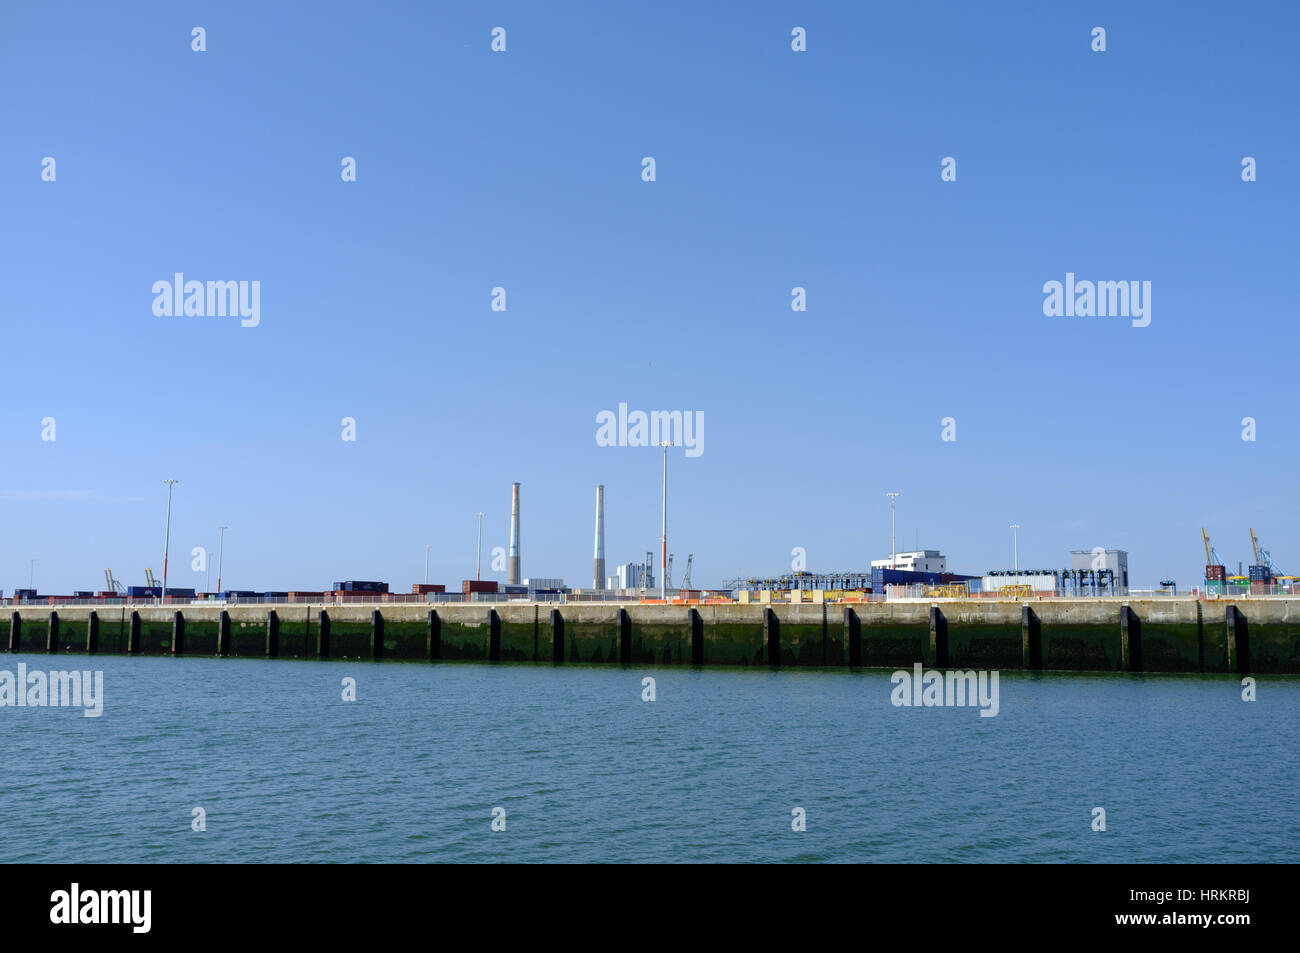 Dockyard view from the sea at the Port of Le Havre, Le Havre, France Stock Photo